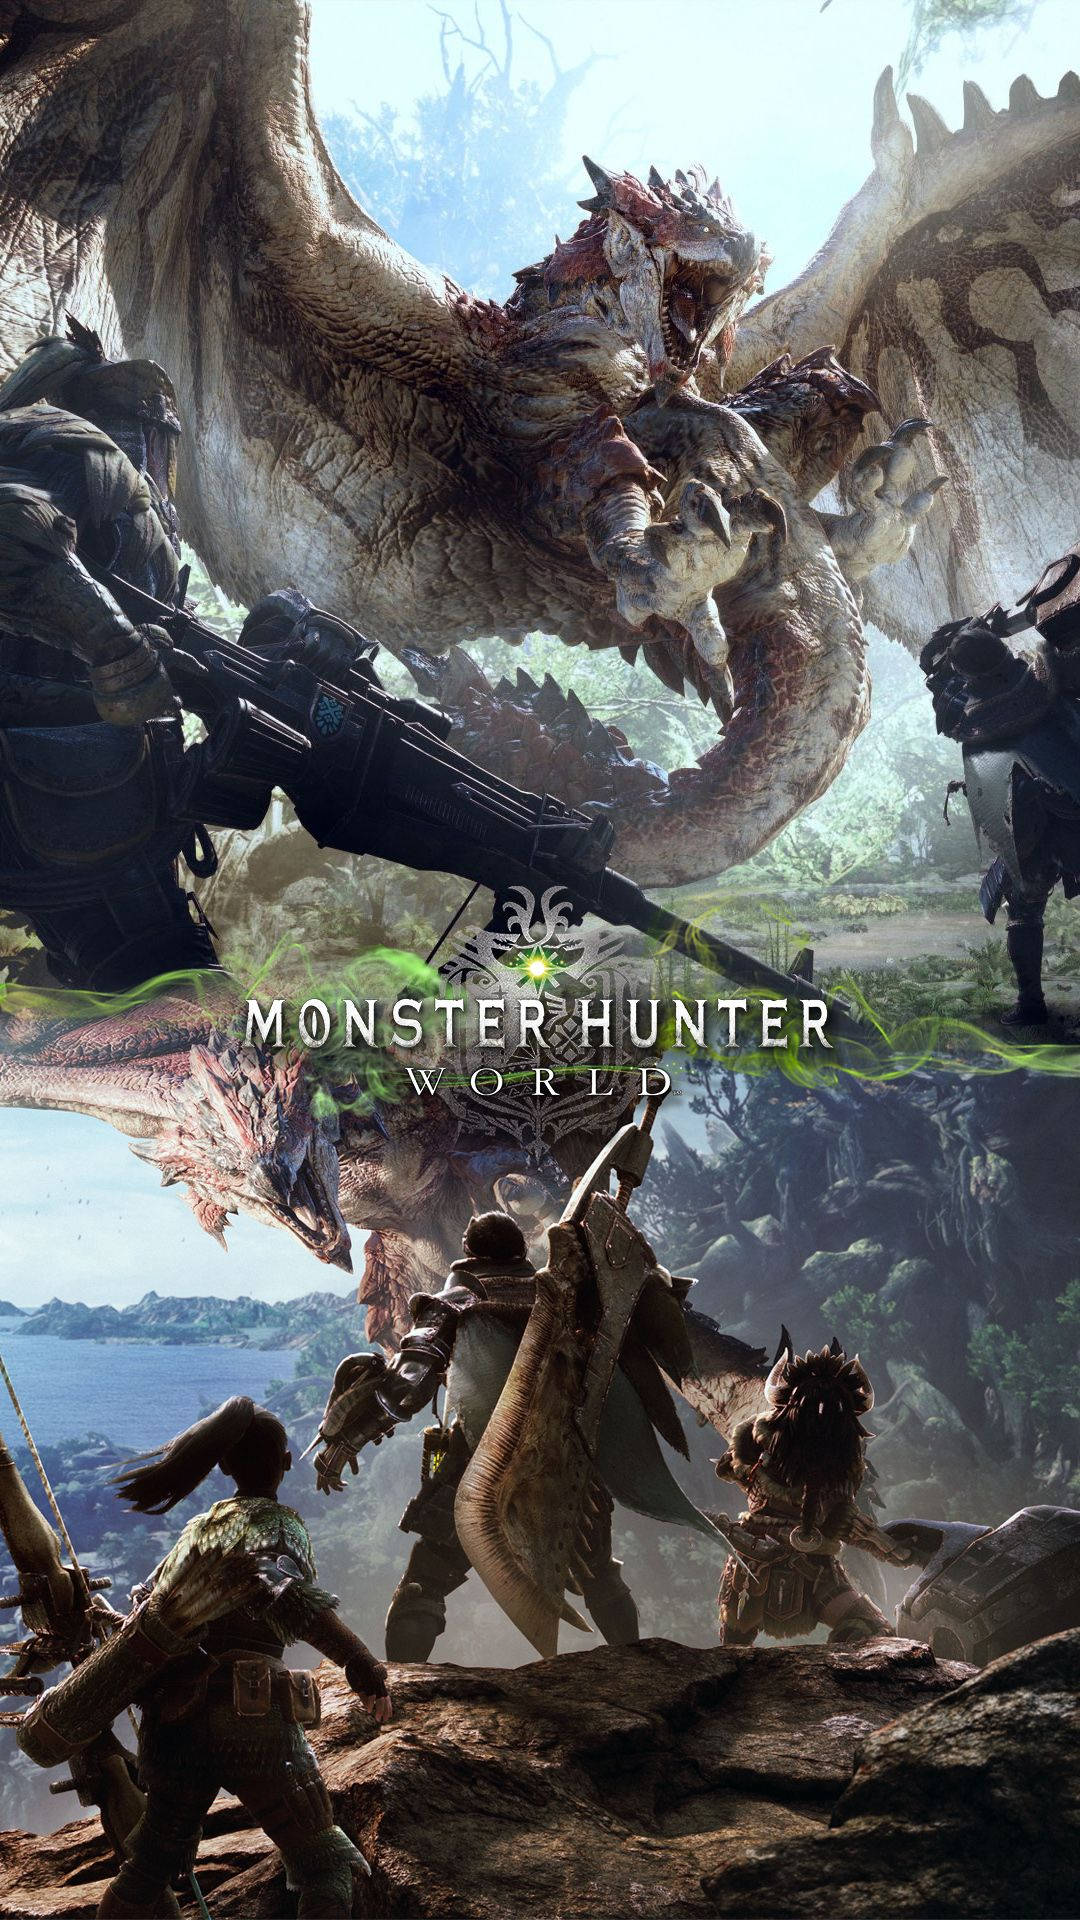 Get ready to take on your ultimate adventure with Monster Hunter on your next smartphone! Wallpaper